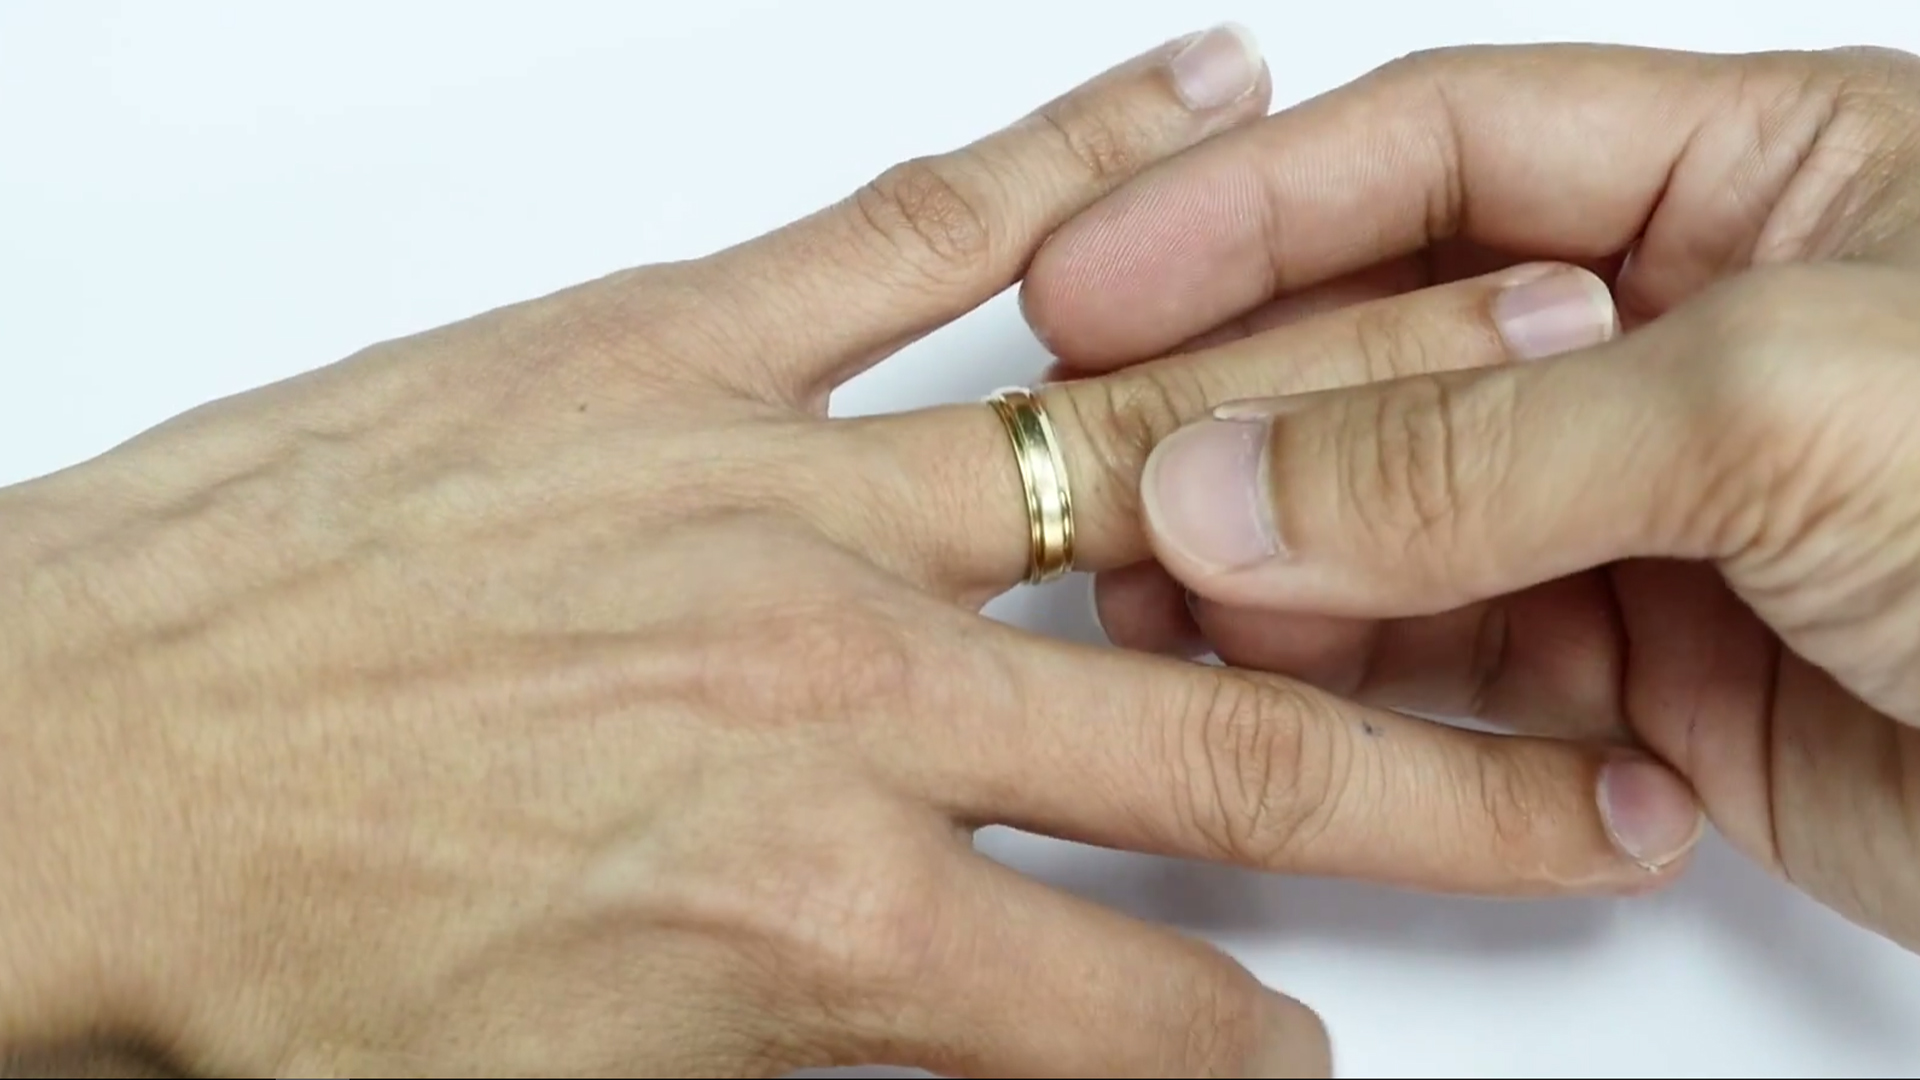 JannPaul Education: How to remove a ring stuck on your finger 